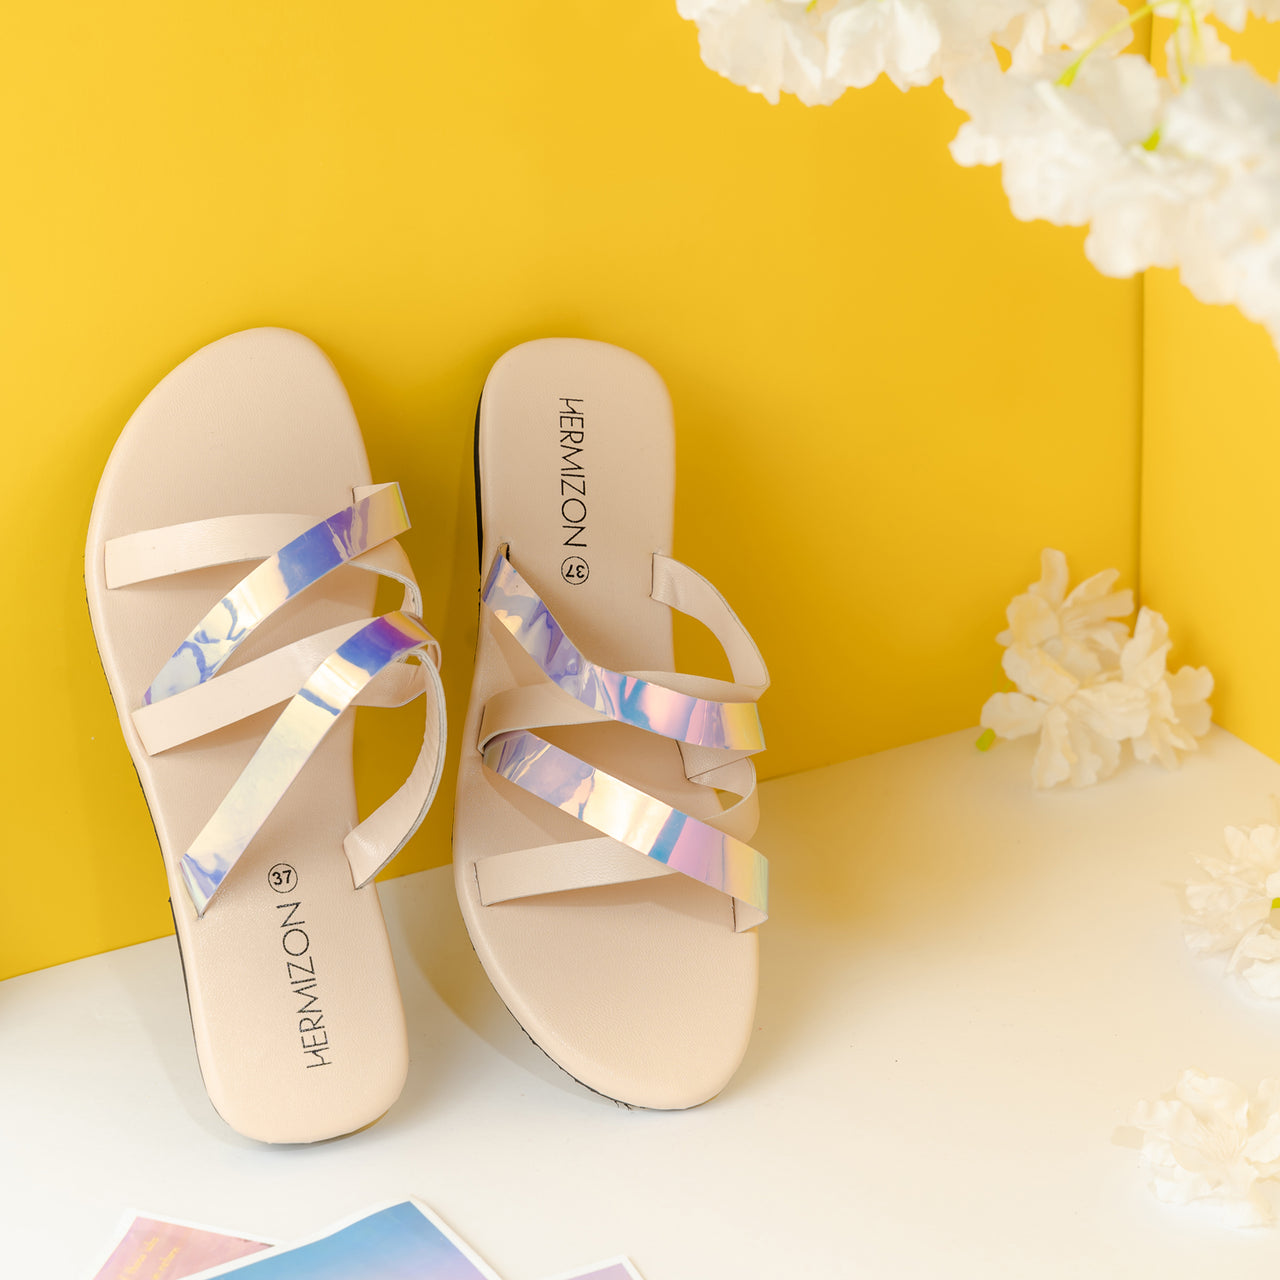 A off white color sandal with gradient strips.